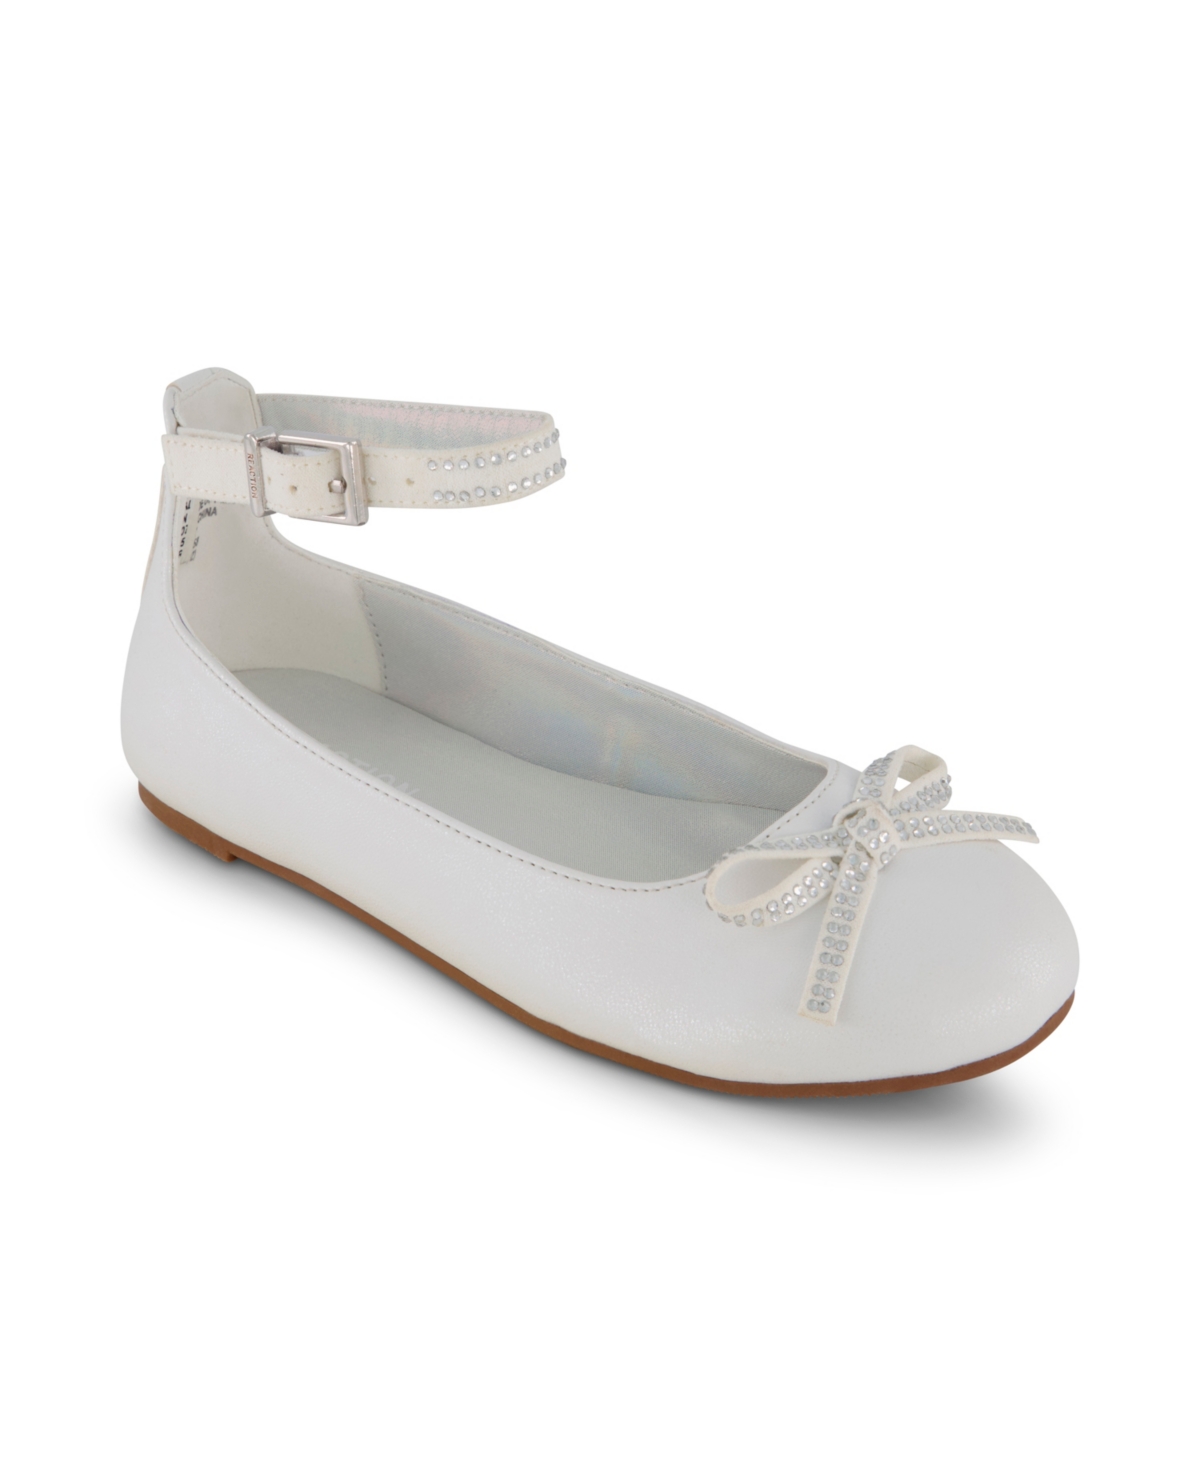 Kenneth Cole New York Little Girls Daisy Sara Ballet Flat Shoes In White